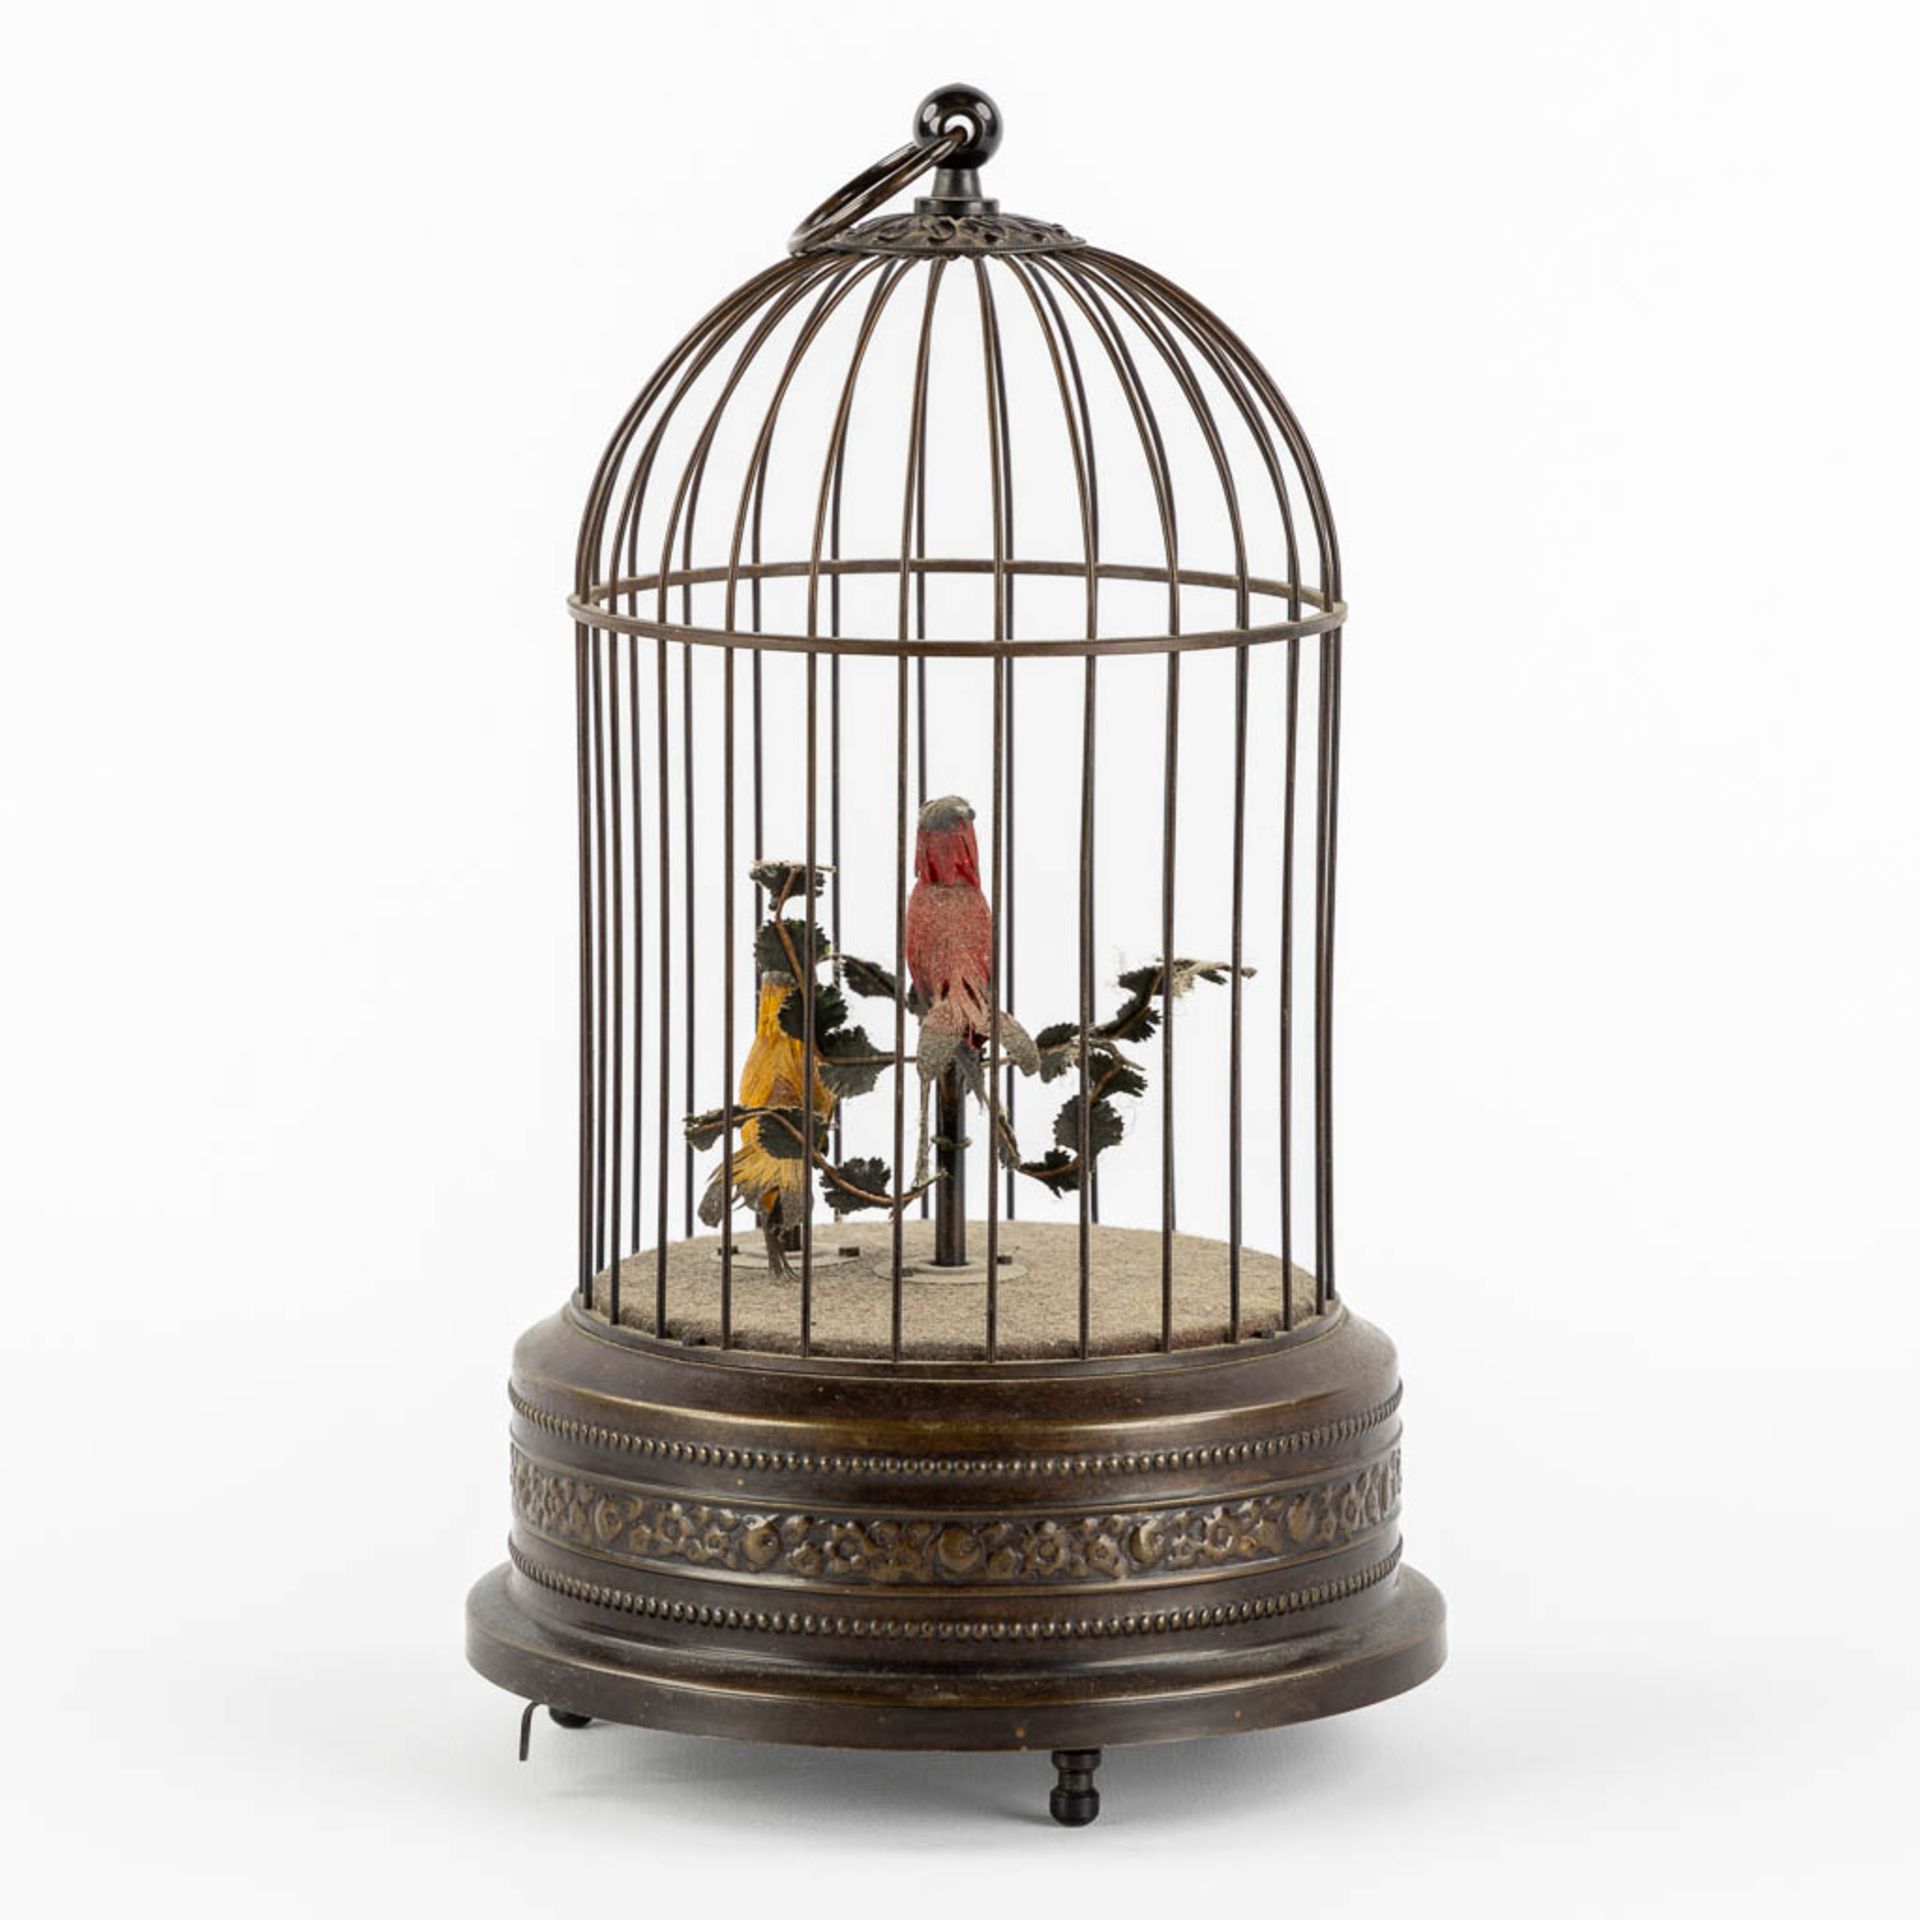 A brass bird-cage automata with two singing birds. (H:28 x D:16 cm) - Image 3 of 9